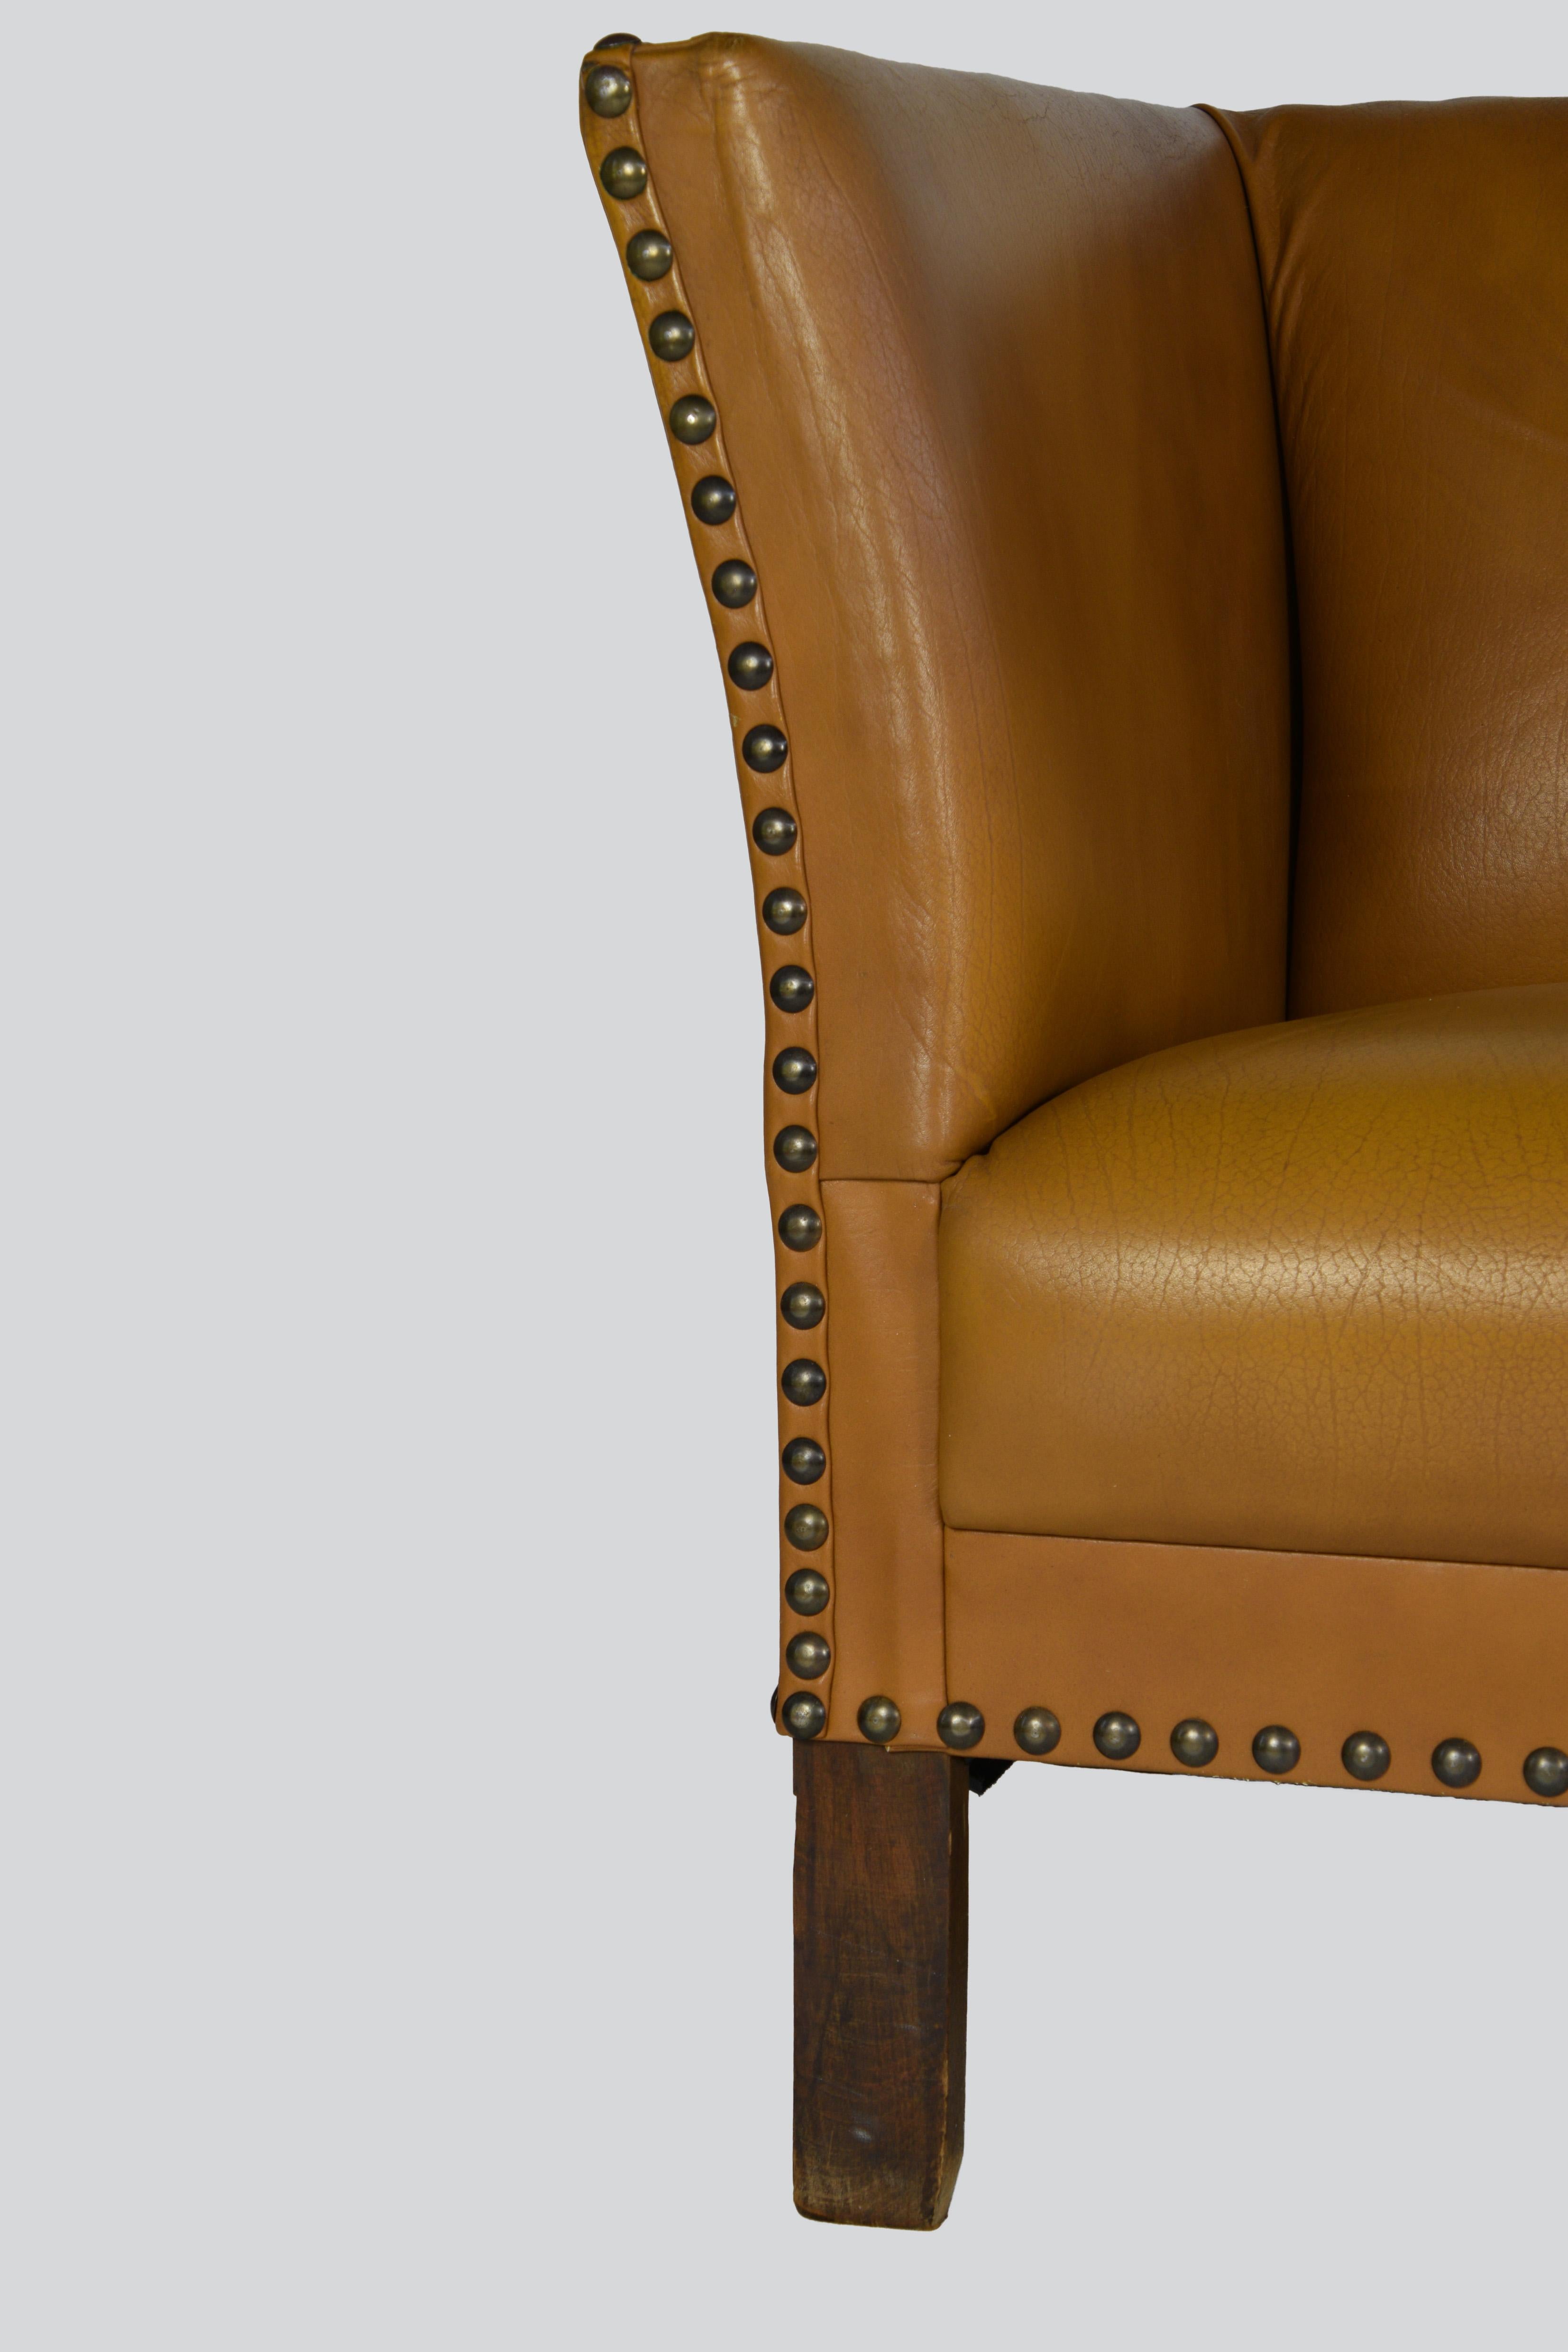 Mid-20th Century Danish Settee in Caramel Nappa, Brass Nailed Upholstery, Made in Denmark in 1940